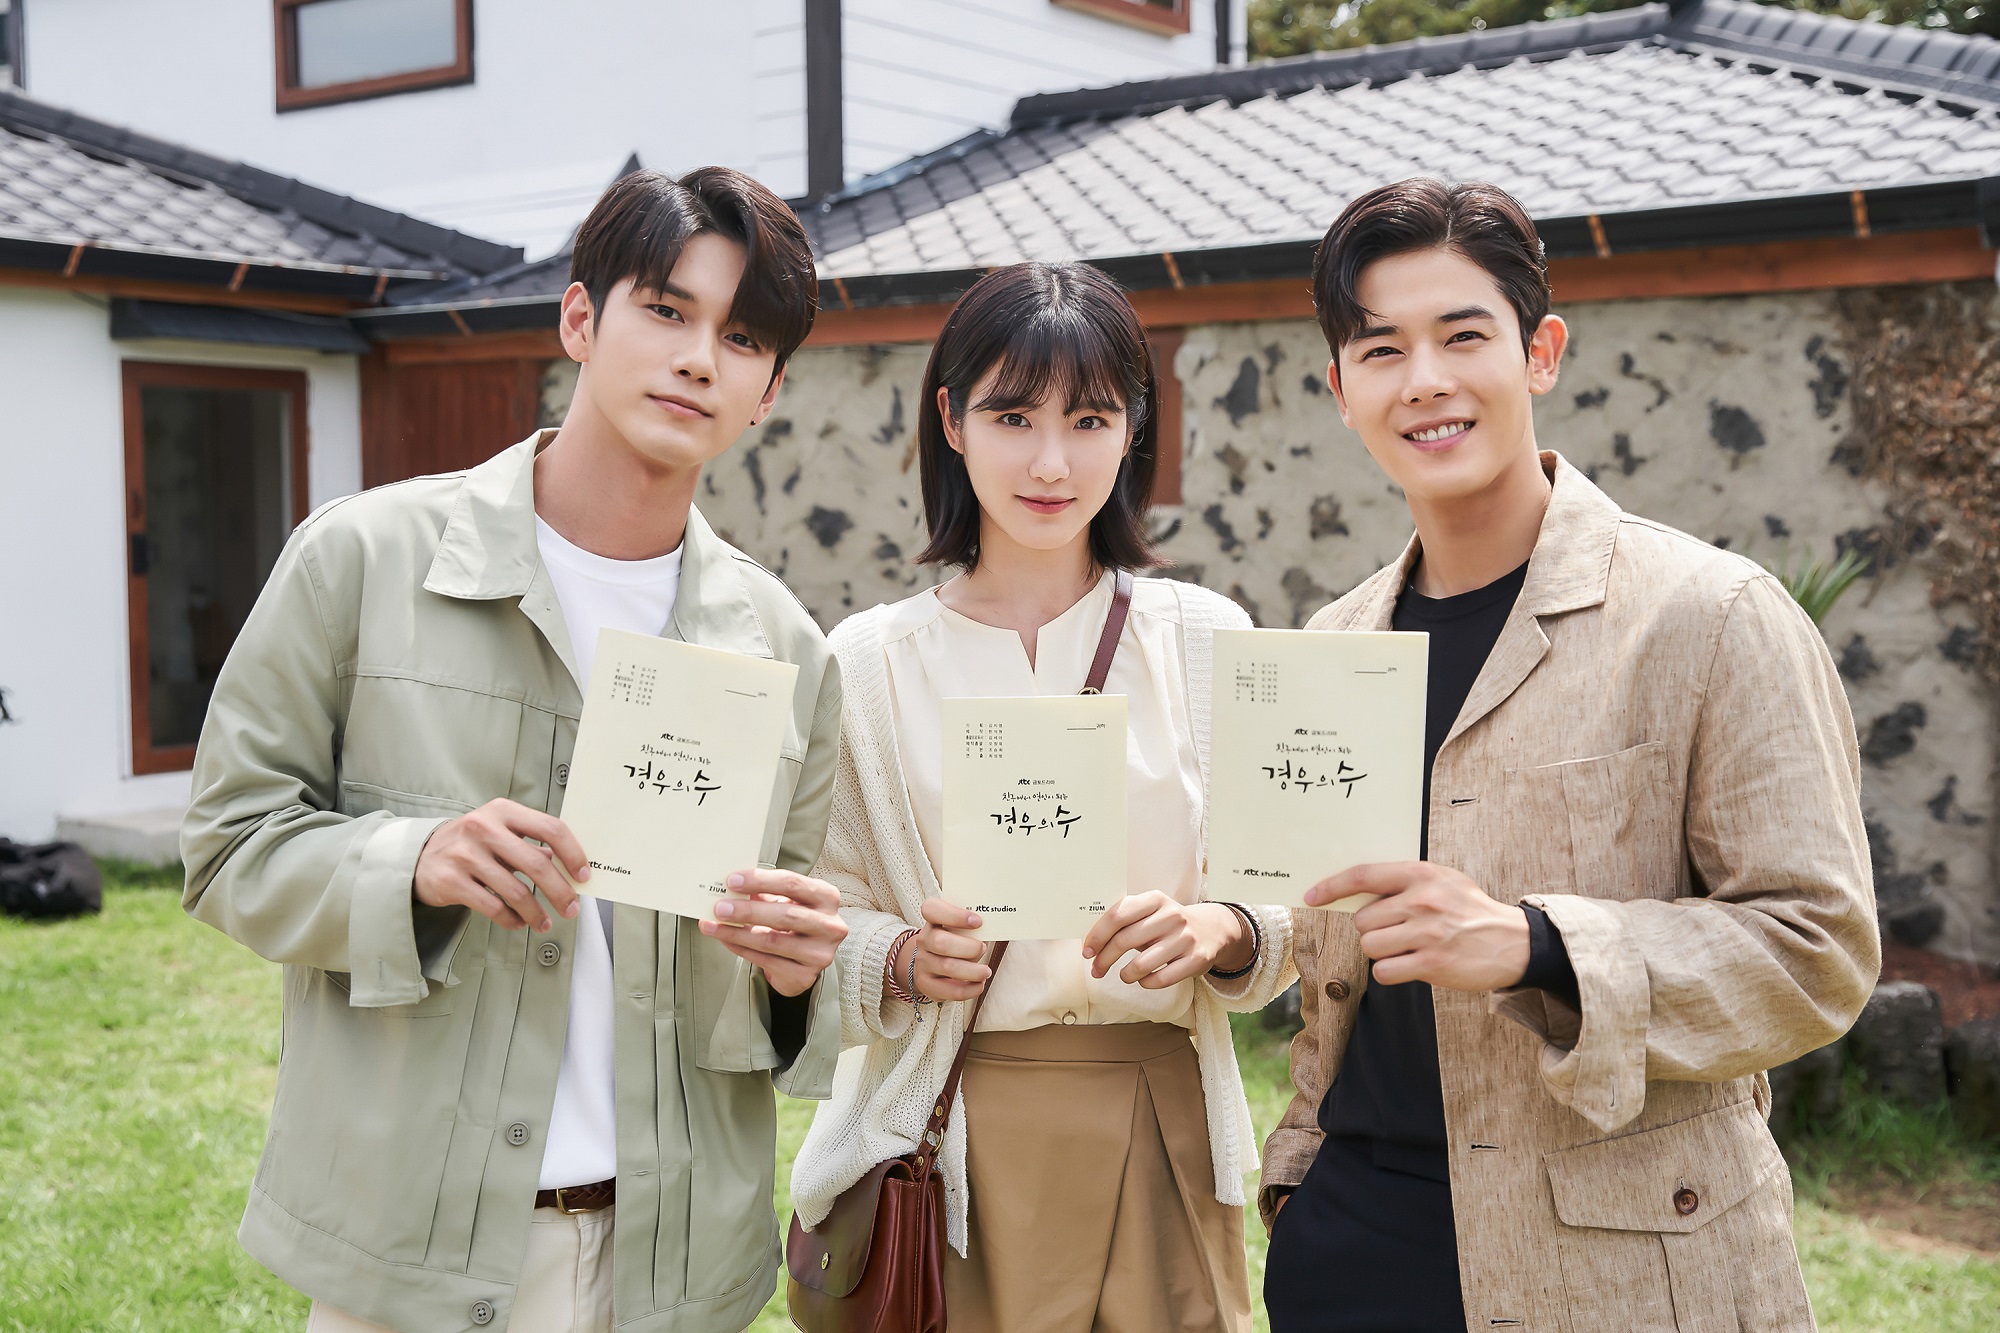 The youth romance of the number of cases Ong Seong-wu, Shin Ye-eun and Kim Dong-jun begins.JTBCs new Golden Jackson The Number of Cases (director Choi Sung-beom, playwright Cho Seung-hee) is about to air today (25th), and it is a warm Celebratory photo that calls for the best catch the premiereAnd the actors said that they picked the point of observation.The number of executives depicts the real youth romance of two men and women who love each other for 10 years.The number of women who have hidden their hearts after a long unrequited love, a man who realizes his heart and reveals his heart, and a lover in Friend causes a thrill.Here, the meeting of hot popular actors who will draw the stories of various youths from Ong Seong-wu, Shin Ye-eun, Kim Dong-jun to Pyo Ji-hoon, Ahn Eun-jin Choi Chan-ho and Baek Soo-min is raising expectations.Ong Seong-wu, who returned to the mature charm, plays photographer Lee Soo, the unrequited love partner of all people and the case-yeon (Shin Ye-eun) in the number of cases.Ong Seong-wu expressed his affection by saying, I am glad and excited to be able to greet Lee Soo with various charms. It was a greedy character.I usually like photography, so I could sympathize a little faster with Sues treatment of photography.I wanted to express the feeling that the number of people who did not shoot people seemed to be cool and lonely when they were shooting, and I hope that those who saw these numbers could feel well.I am always trying to show a good performance, but I am always worried about it. Not only Lee Soo and the chemistry of the case, but also the breathing with the 10-year-old Friends Jin Sang-hyuk (Pyo Ji-hoon), Kim Yeong-hee (Ahn Eun-jin), Shin Hyun-jae (Choi Chan-ho), and Han Jin-joo (Baek Soo-min) are expected.Im meeting and acting with people who are good enough to be lucky, said Ong Seong-wu, and Im excited and excited about each others characters because they are so close to each other.Finally, Ong Seong-wu said, The moment when the relationship is mixed and mismatched comes at any time, I can check each others minds in it and find out what I have not seen.Woo Yeon Yi and Sue are like that, and if you watch the process of change in relationships, youll be able to enjoy it more fun, he said, adding that the first shows point of view.The most popular youth star Shin Ye-eun is divided into the case of the UEFA Champions League rapper who is cursed by unrequited love.Shin Ye-eun said, When I first saw the script, I thought that it contained a story that anyone would have experienced once in their daily life, and I felt a familiar charm.Its a work that has the charm to see as we look forward to seeing what number of cases will happen as the meeting goes on.As for the role of the UEFA Champions League rapper in the play, I was always interested in the UEFA Champions League.It was very exciting and nice to play the UEFA Champions League rapper in this work.It was so attractive to express the message I wanted to express in writing while acting on the CalUEFA Champions League.I am grateful that I can see another field. In case of the case, Lee Soo, the unrequited love partner, and Kim Dong-jun, who likes him, stand at the center of triangular romance.Shin Ye-eun said, Lee Soo and On Junsu can be described as cold and on. Both characters are very attractive.Both of them have a big and important impact on Woo Yeon Yi, but the charm of the character will feel different depending on the background of life and the way of expression toward people. As for the breathing with Kim Yeong-hee and Han Jin-joo, The most important part of this work is the story with Friends.Younghee, Jinju, and Woo Yeon Yi are different characters in their environment, personality, and hobby. They gathered together to think about what kind of chemistry they could bring.I thought about things that I could know and know without saying a lot of things like a decade ago, and I spent time at home with delicious things on the excuse of script practice.Thank you very much to Ahn Eun-jin and Baek Soo-min Actor for creating the atmosphere of the real Teachin.Finally, I told the story of the youth who first encountered the unexpected moments in many cases.It may be your first love, it may be a dream, it may be something else, which is a comprehensive gift set that contains all of it.I hope that viewers will sympathize and heal together. Actor Kim Dong-jun, who has a versatile charm, plays the role of a white horse, a straight-on-the-line hot-junsu, who will release the curse of unrequited love.Kim Dong-jun said, Compliance is a character that I have never experienced before.It is a character with perfect conditions and charm that seems to be in the world, from the job of publishing company representative to the sweet personality to appearance.I thought that the heroine Woo Yeon Yi had to show her character as well as her personality, because she came like fate.Im particularly concerned about exercise and visual management as well as acting, he said.The synergy with youth actors is the biggest reason to wait for the number of fair cases. Kim Dong-jun said, It was a little awkward at first because I was so familiar.Now I am comfortable and friendly enough to be awkward to play with.Shin Ye-eun Actor thought that every time he acted together, he was the perfect actor for Woo Yeon Yi, and Ong Seong-wu Actor felt that his eyes were a good friend.I also saw my former appearance as I watched the singers activities and acting perfectly in parallel. Finally, he said, The number of cases contains all the feelings about love that you think, from love to warm excitement and occasional longing.I hope you will love me a lot and share with me the love in the memories of viewers.I would like to expect his change and his change as well as his fate. Meanwhile, JTBCs new Golden Todd, Lamar Jacksons Number of Cases, will be broadcast at 11 p.m. today (25th).iMBCPhoto Offers: JTBC Studio, Contents Build